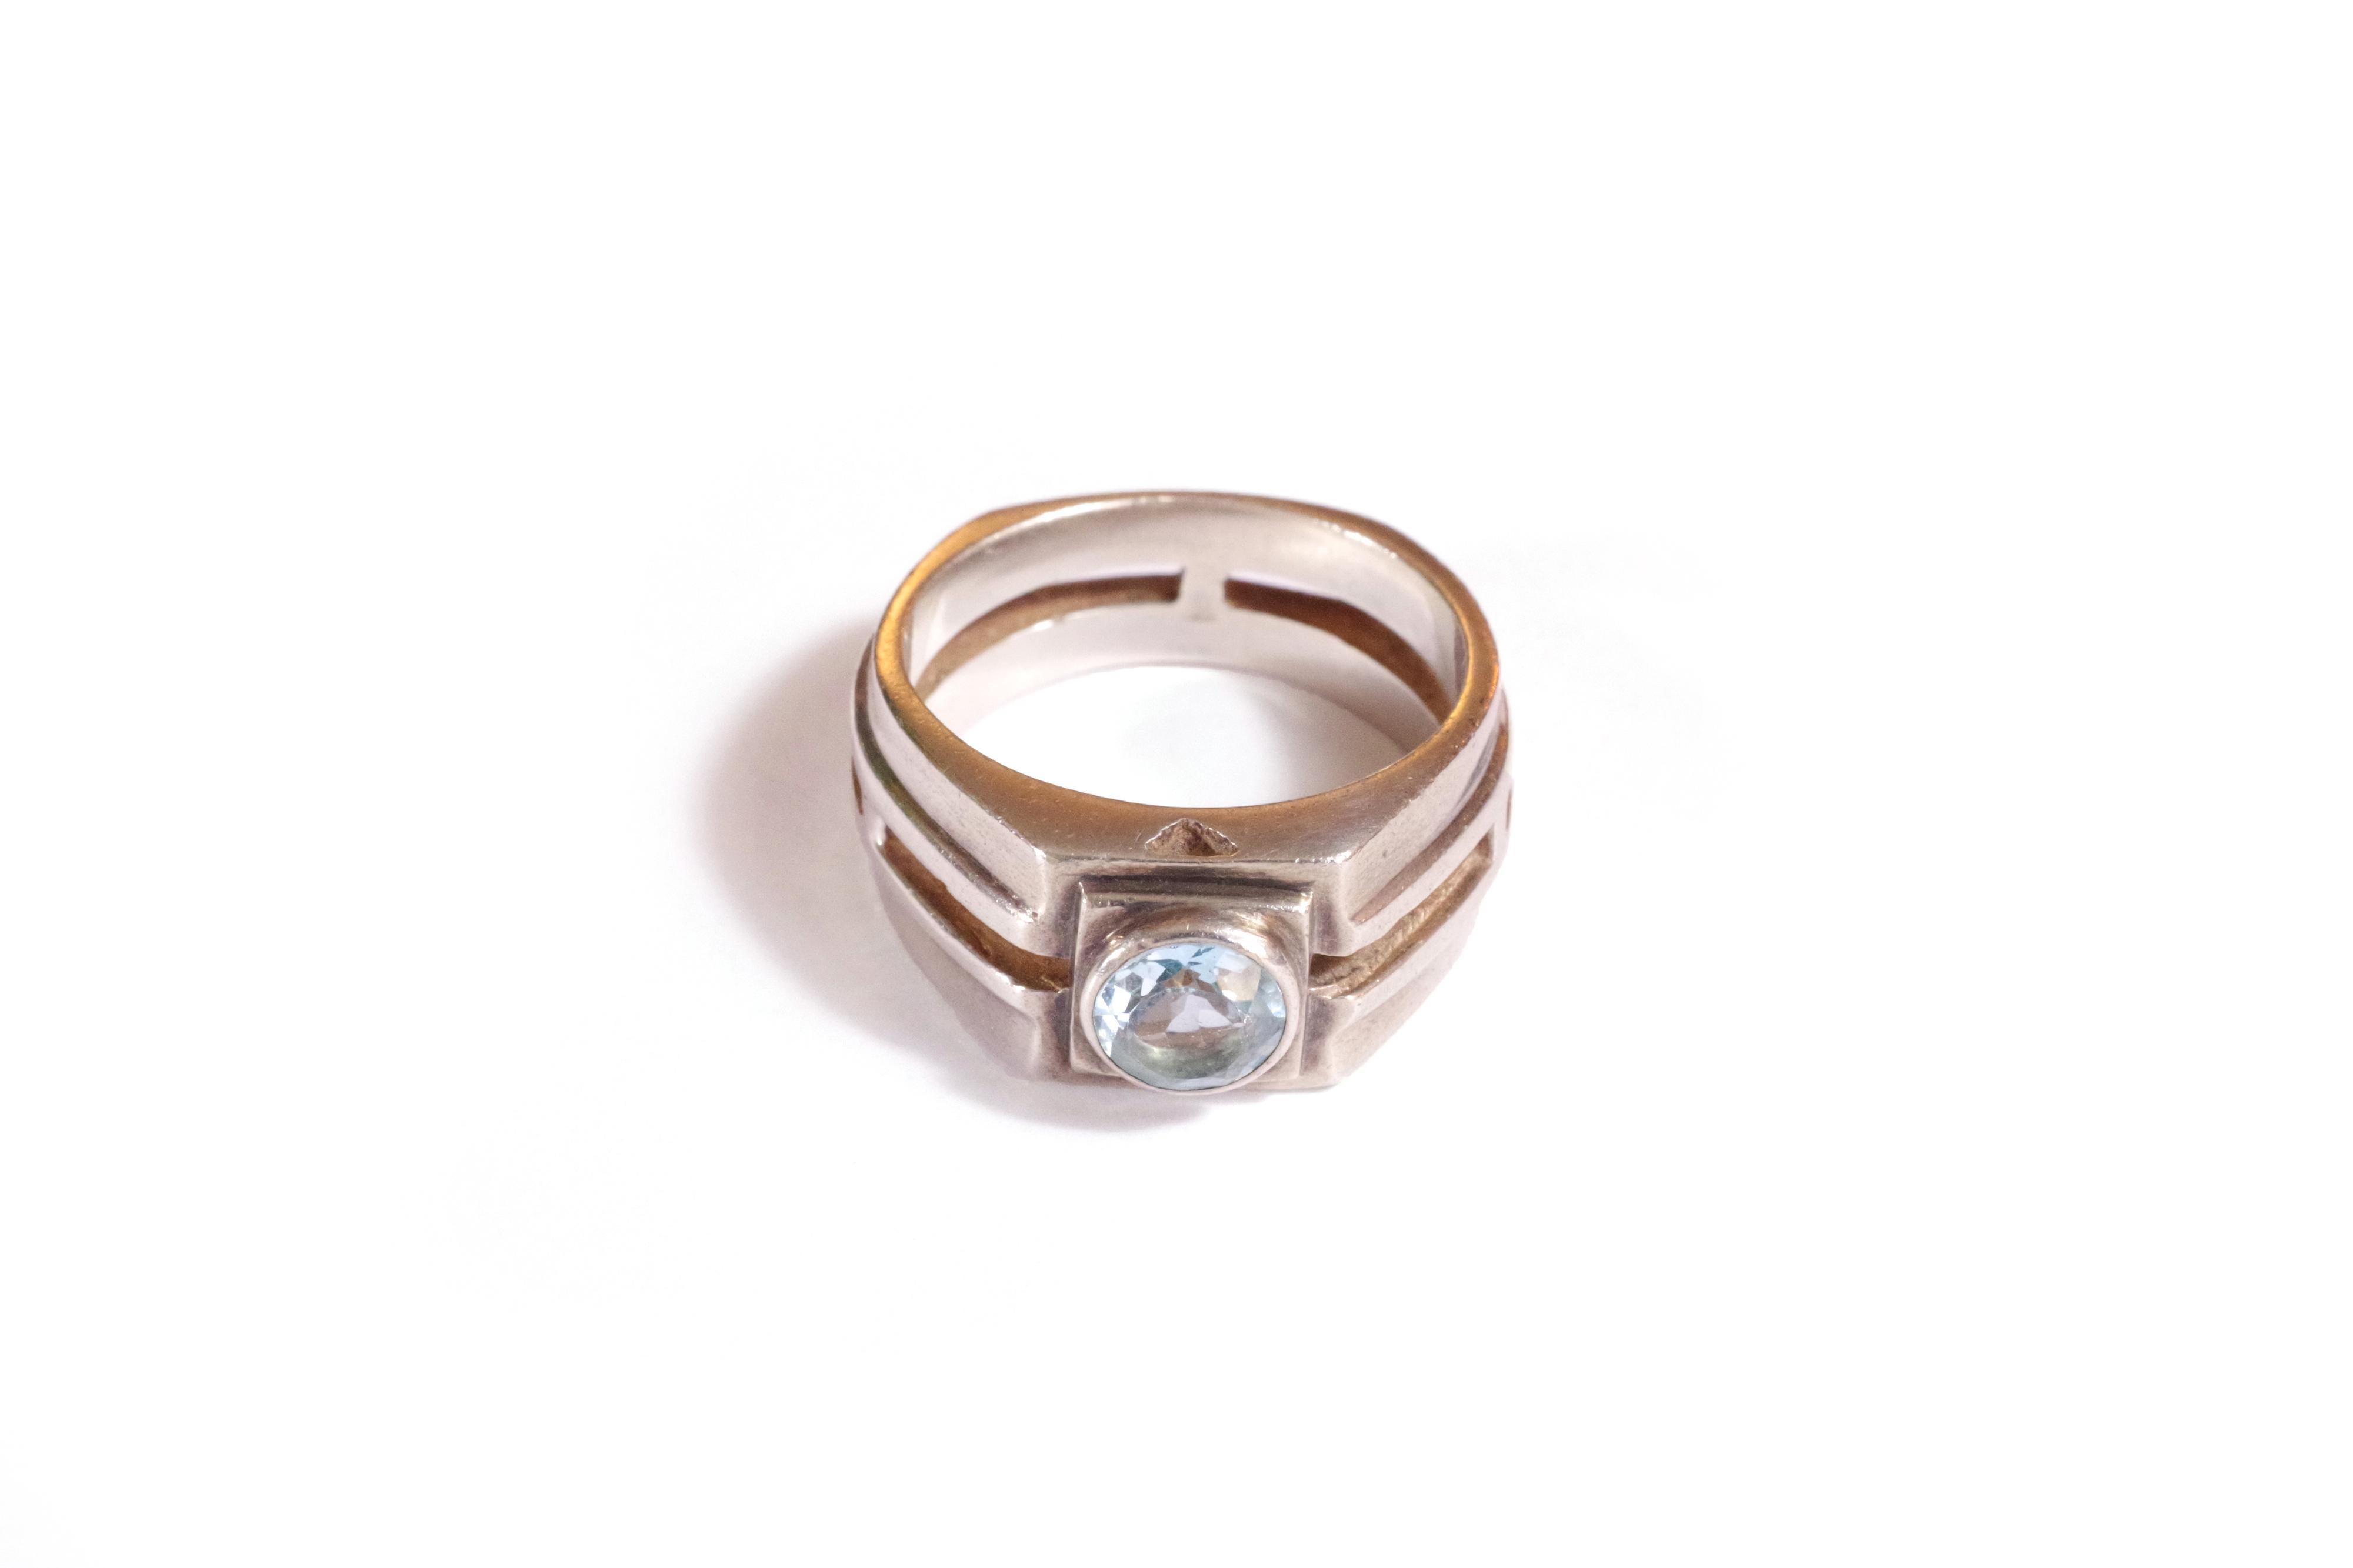 Retro Tank Topaz Ring made of silver with a bezel-set topaz of blue color in the center of the ring with geometric lines. The ring is also worked in openwork. Foreign work, end of the Retro period.

Partially erased silver hallmark, 925 hallmark, SM